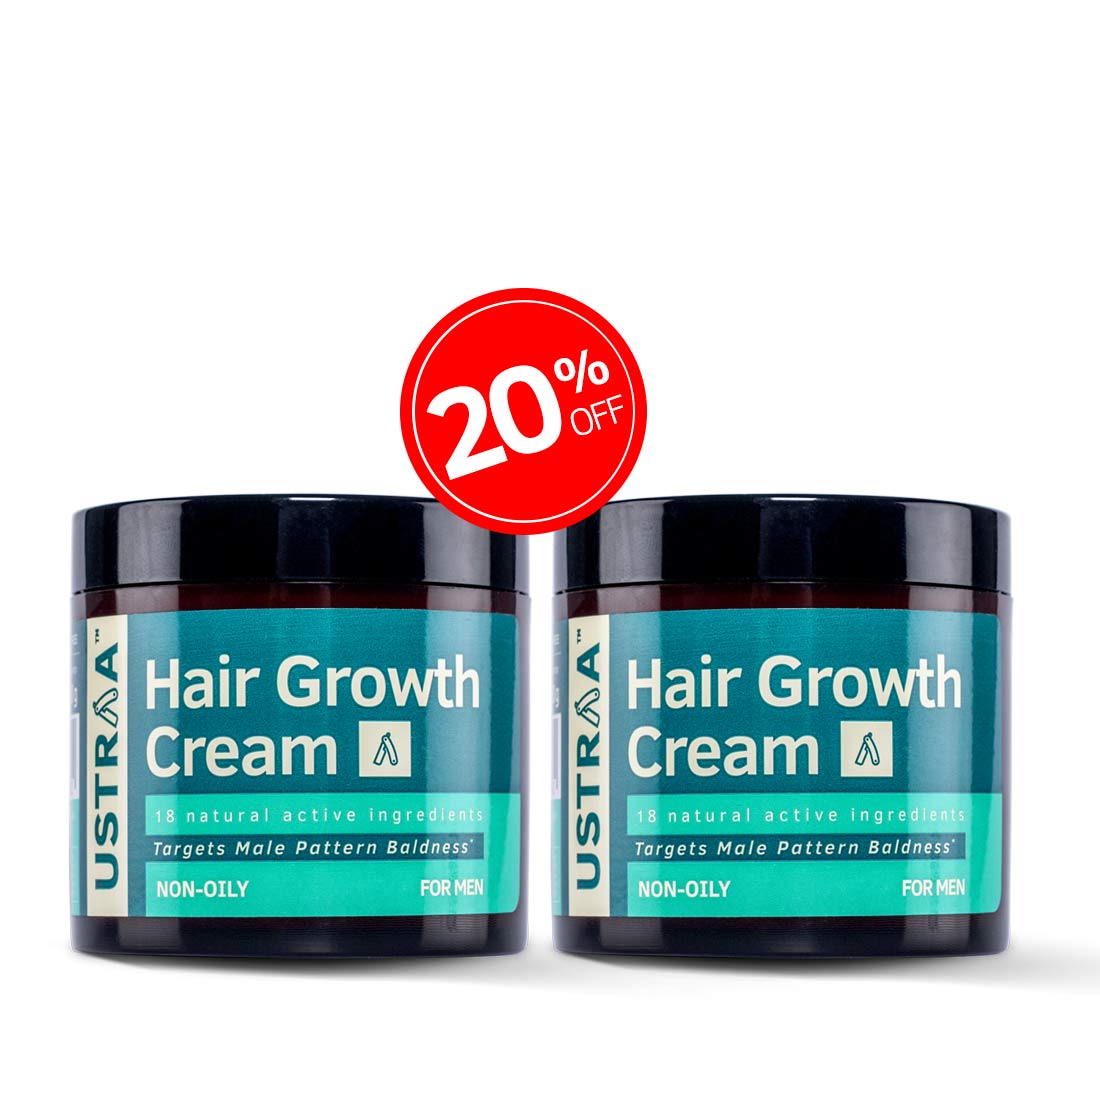 Ustraa Hair Growth Cream | 66% Reduction in Male Pattern Baldness